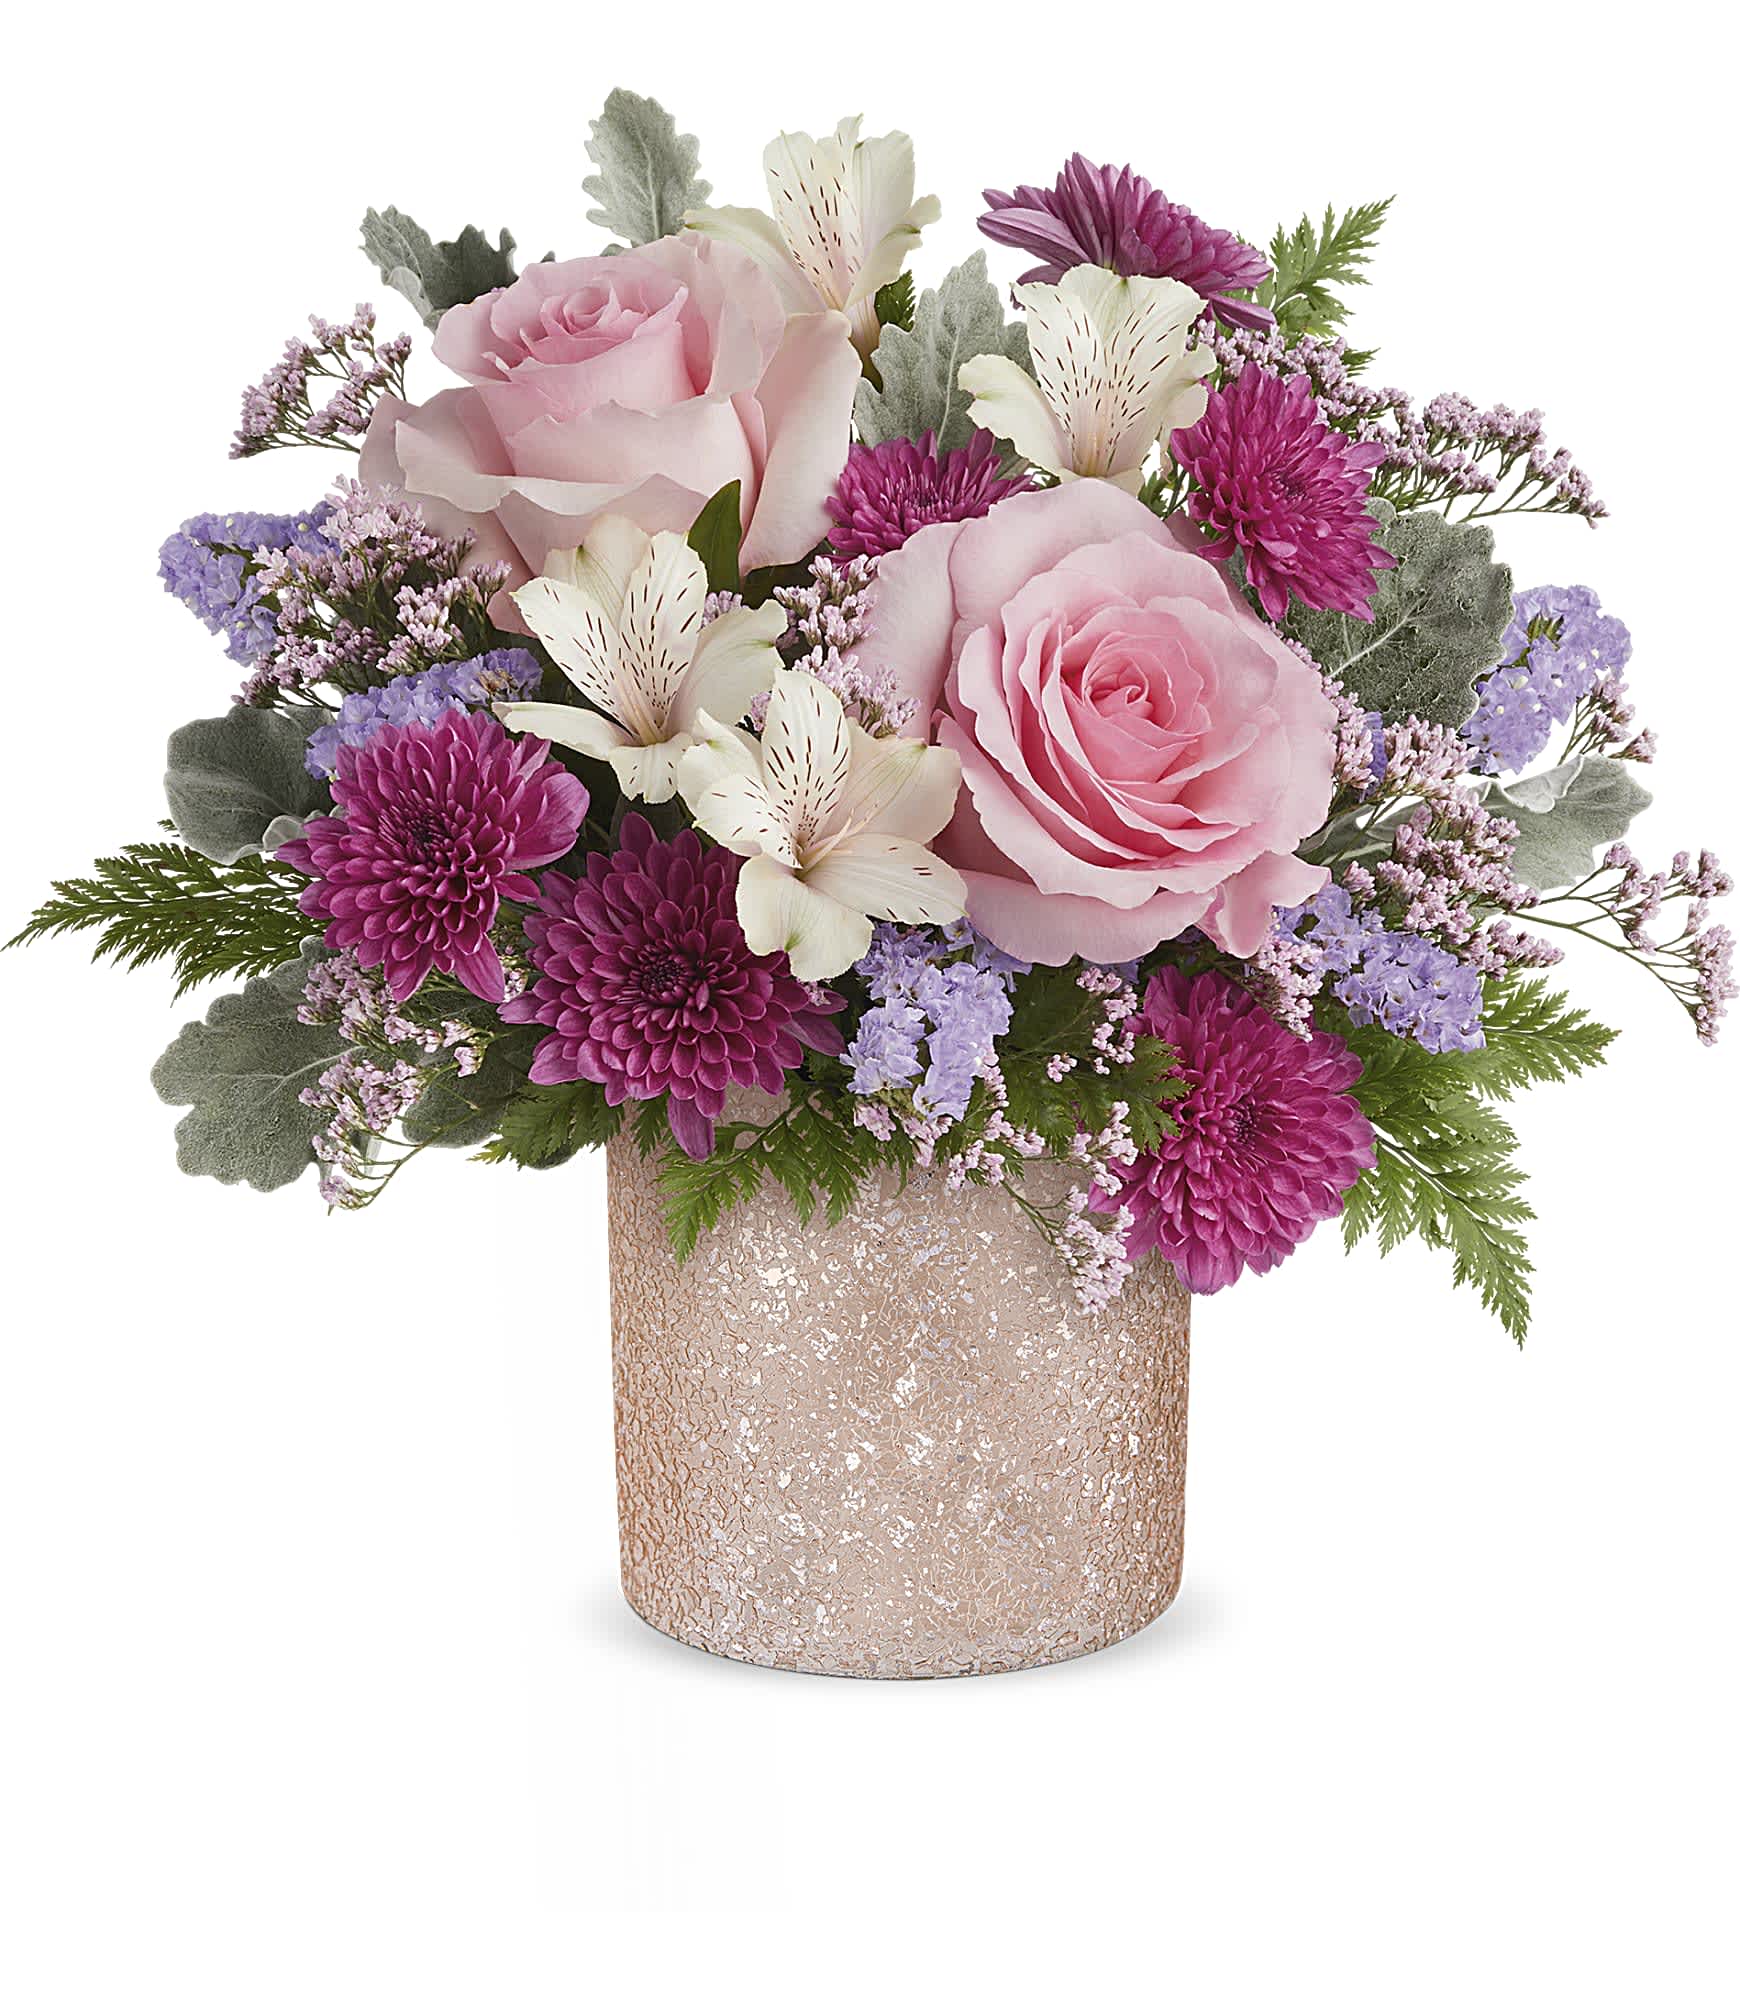 Blooming Brilliant - Add a touch of sparkle to Mom's day with Teleflora's Blooming Brilliant cylinder, boasting a crushed glass texture and a soft ballerina pink hue, perfect for showcasing a dreamy Mother's Day bouquet. Elevate mom's day with Teleflora's Blooming Brilliant cylinder, boasting a crushed glass texture in ballet pink, perfectly complementing a bouquet of pink roses, ivory alstroemeria, purple cushion spray chrysanthemums, lavender sinuata statice, pink limonium, dusty miller, and leatherleaf fern, a dazzling Mother's Day surprise. Approximately 14&quot; W x 12 1/2&quot; H